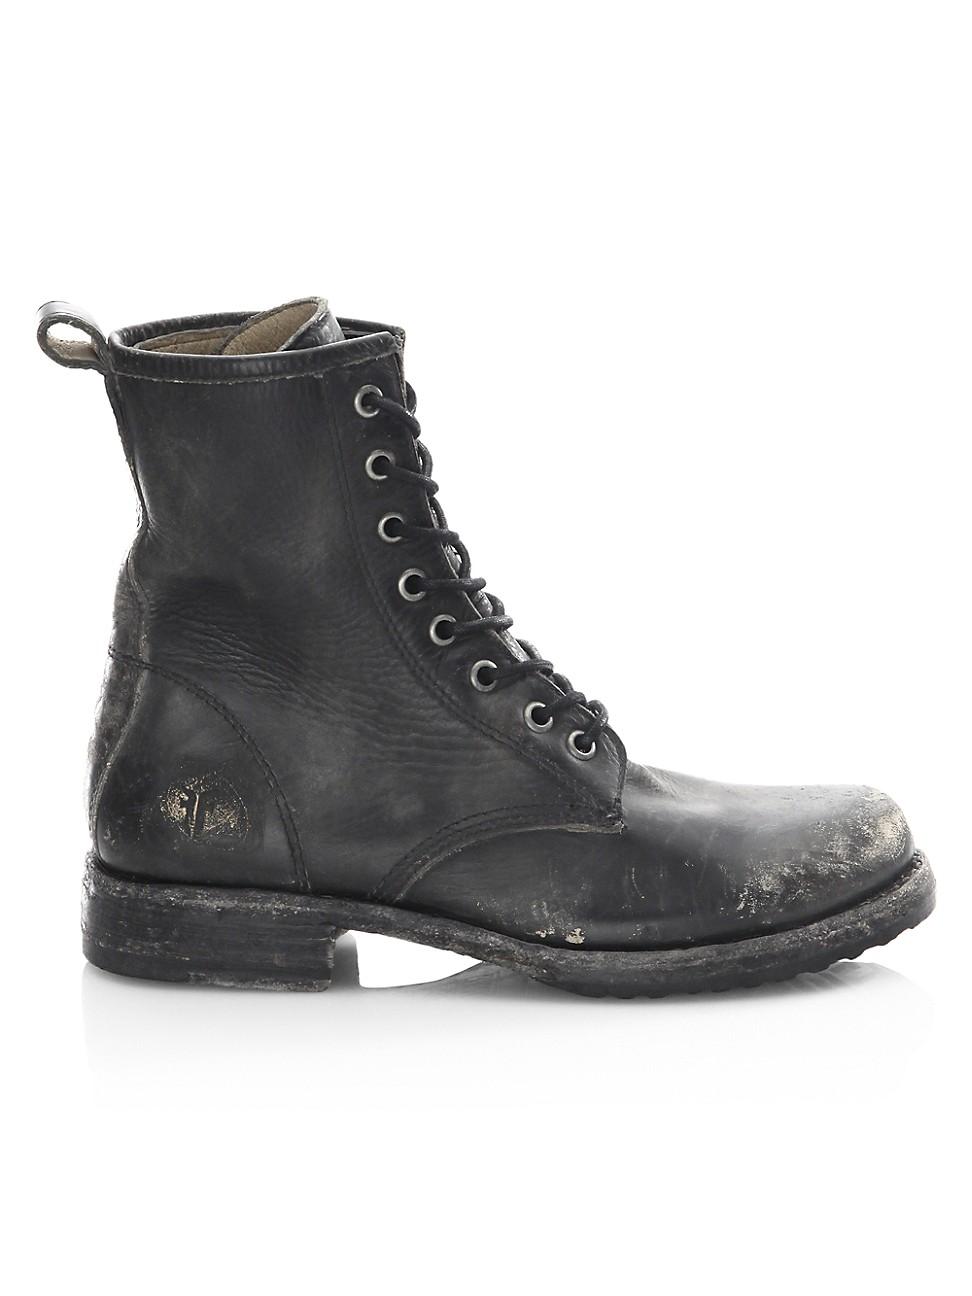 Frye Veronica Distressed Leather Combat Boots in Black | Lyst